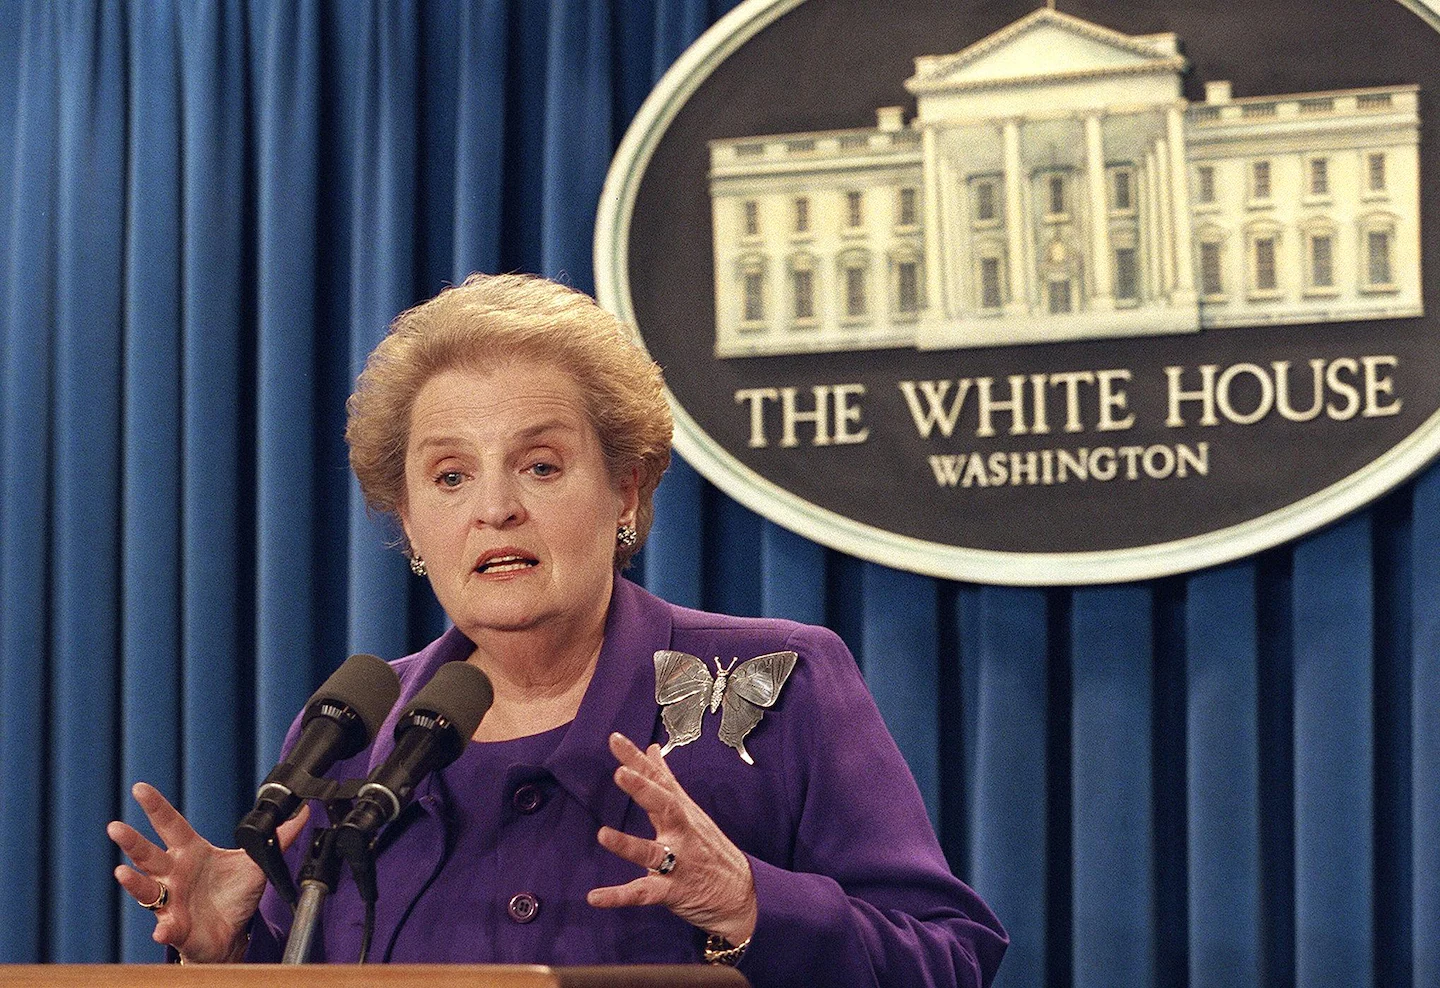  Madeleine Albright’s pins live on at State Department museum